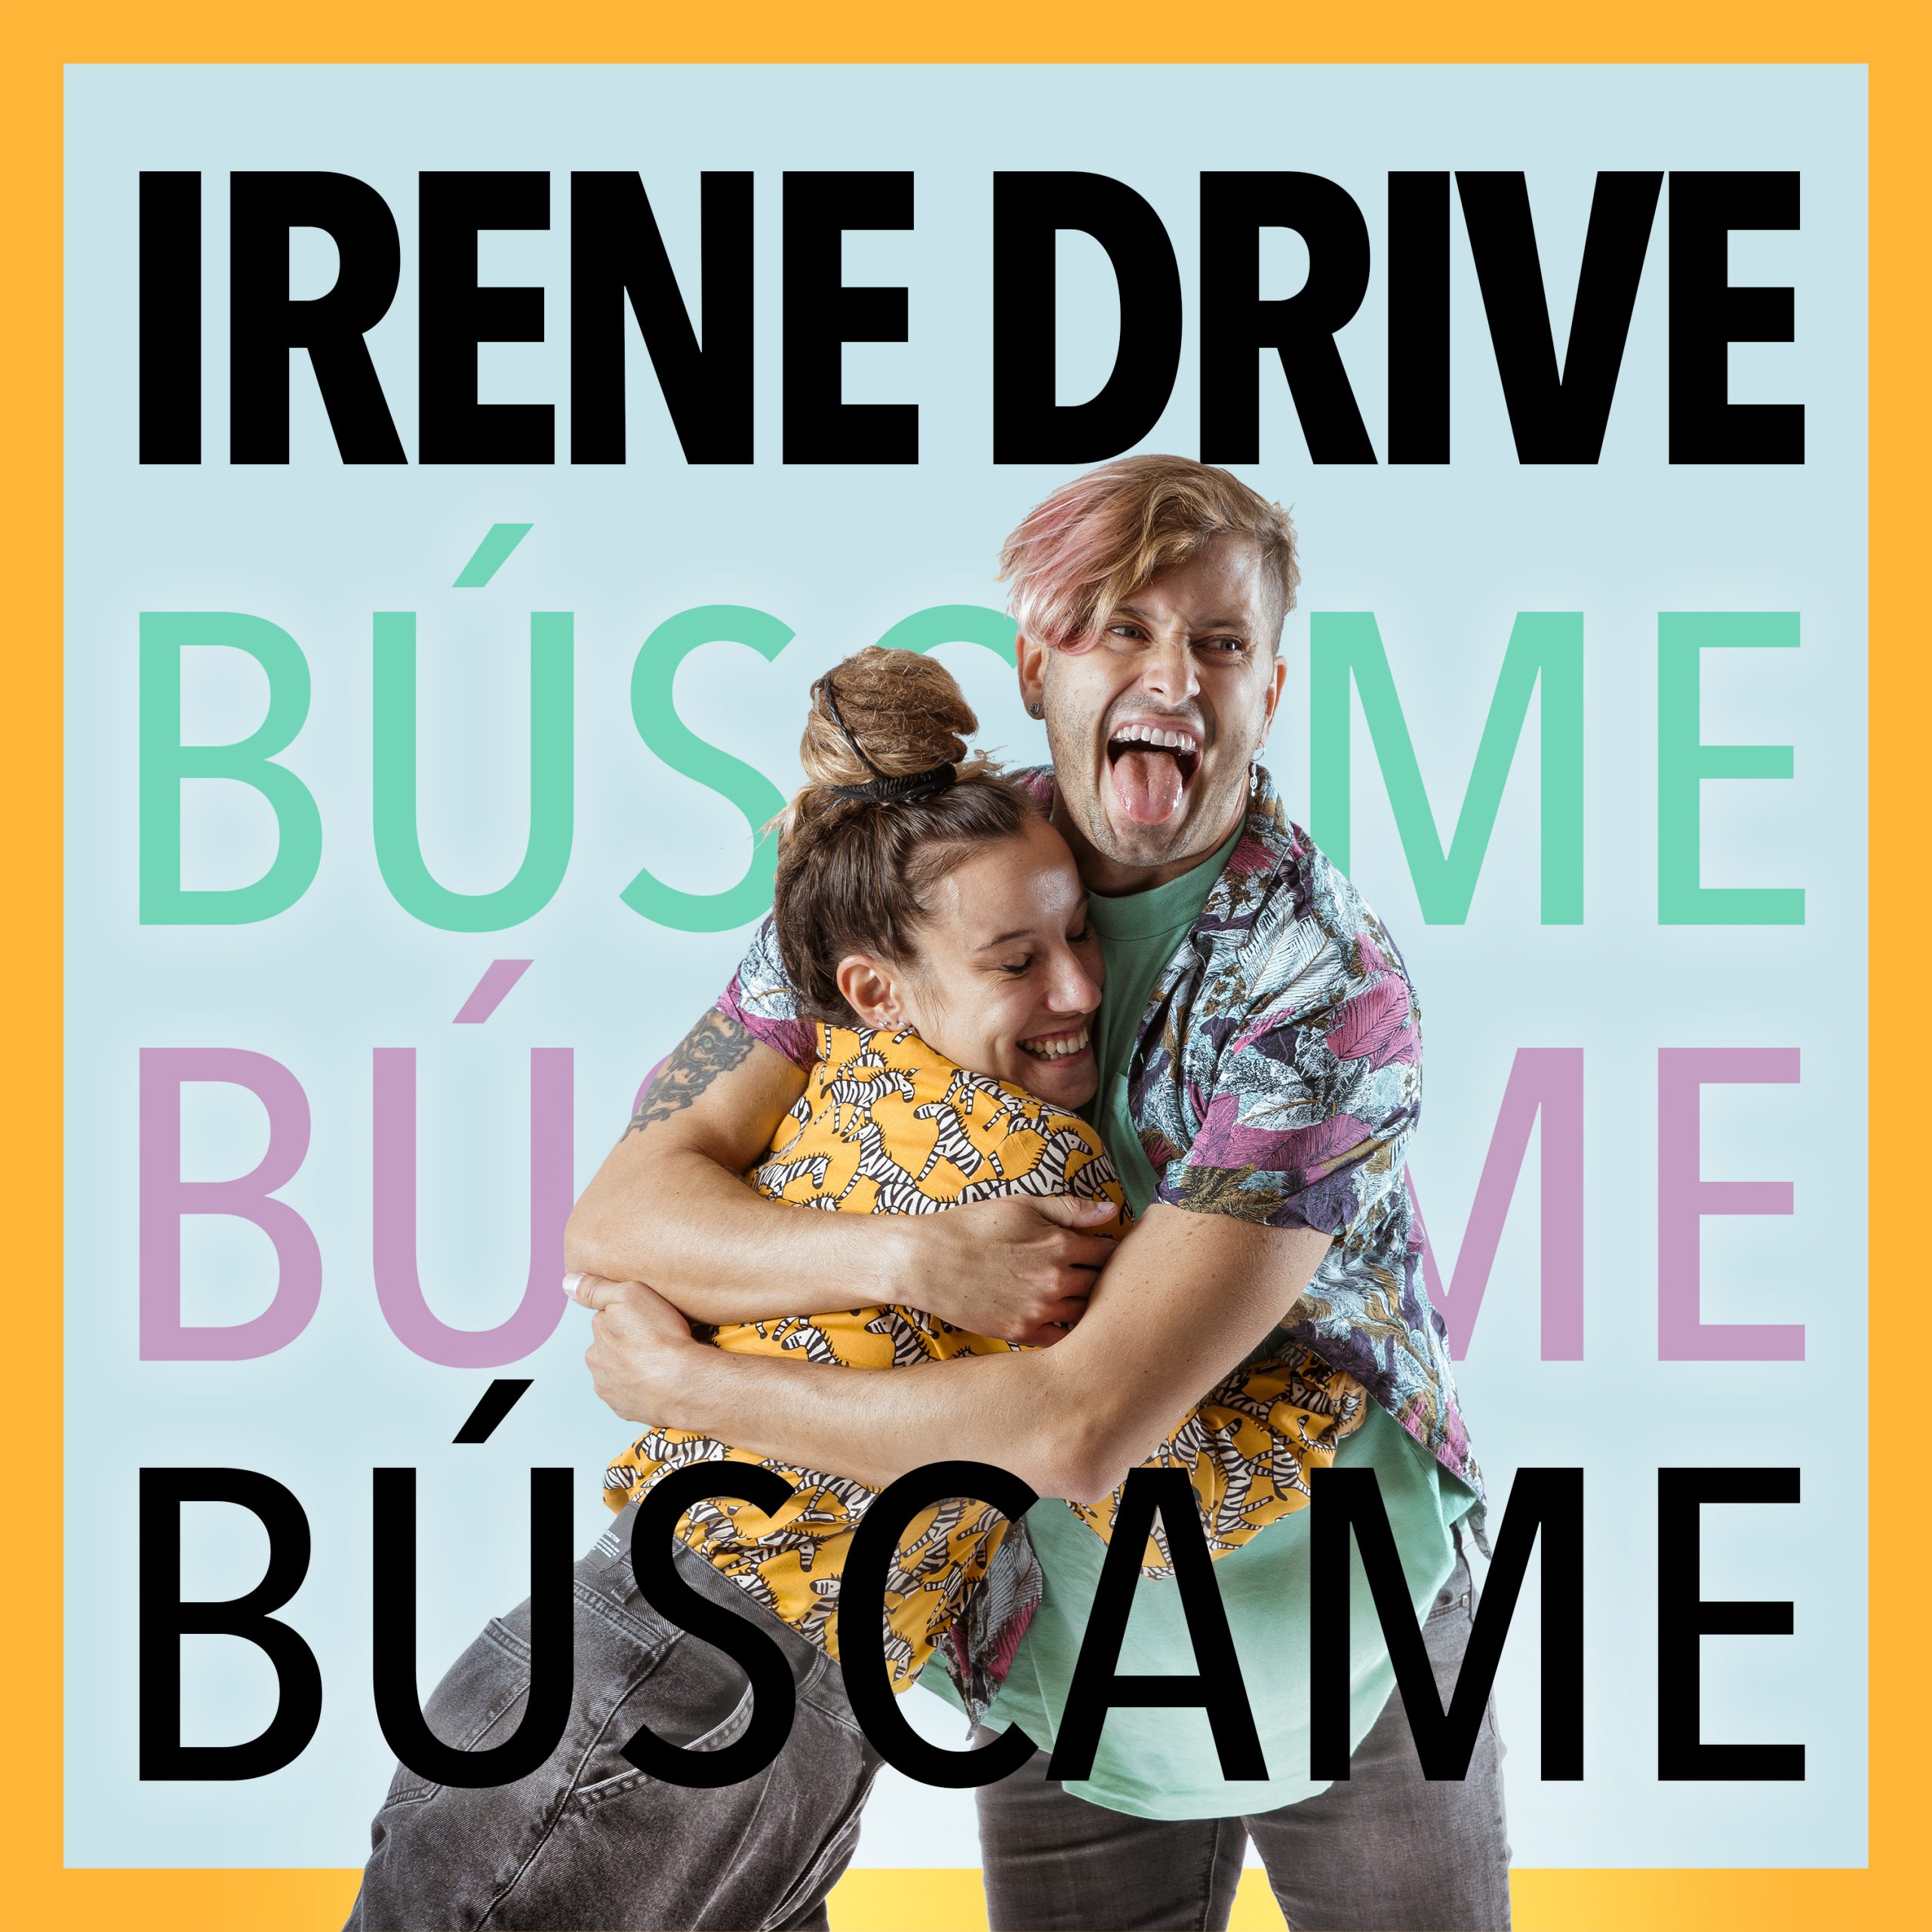 IRENE_DRIVE_BUSCAME_ok_(30000×3000)